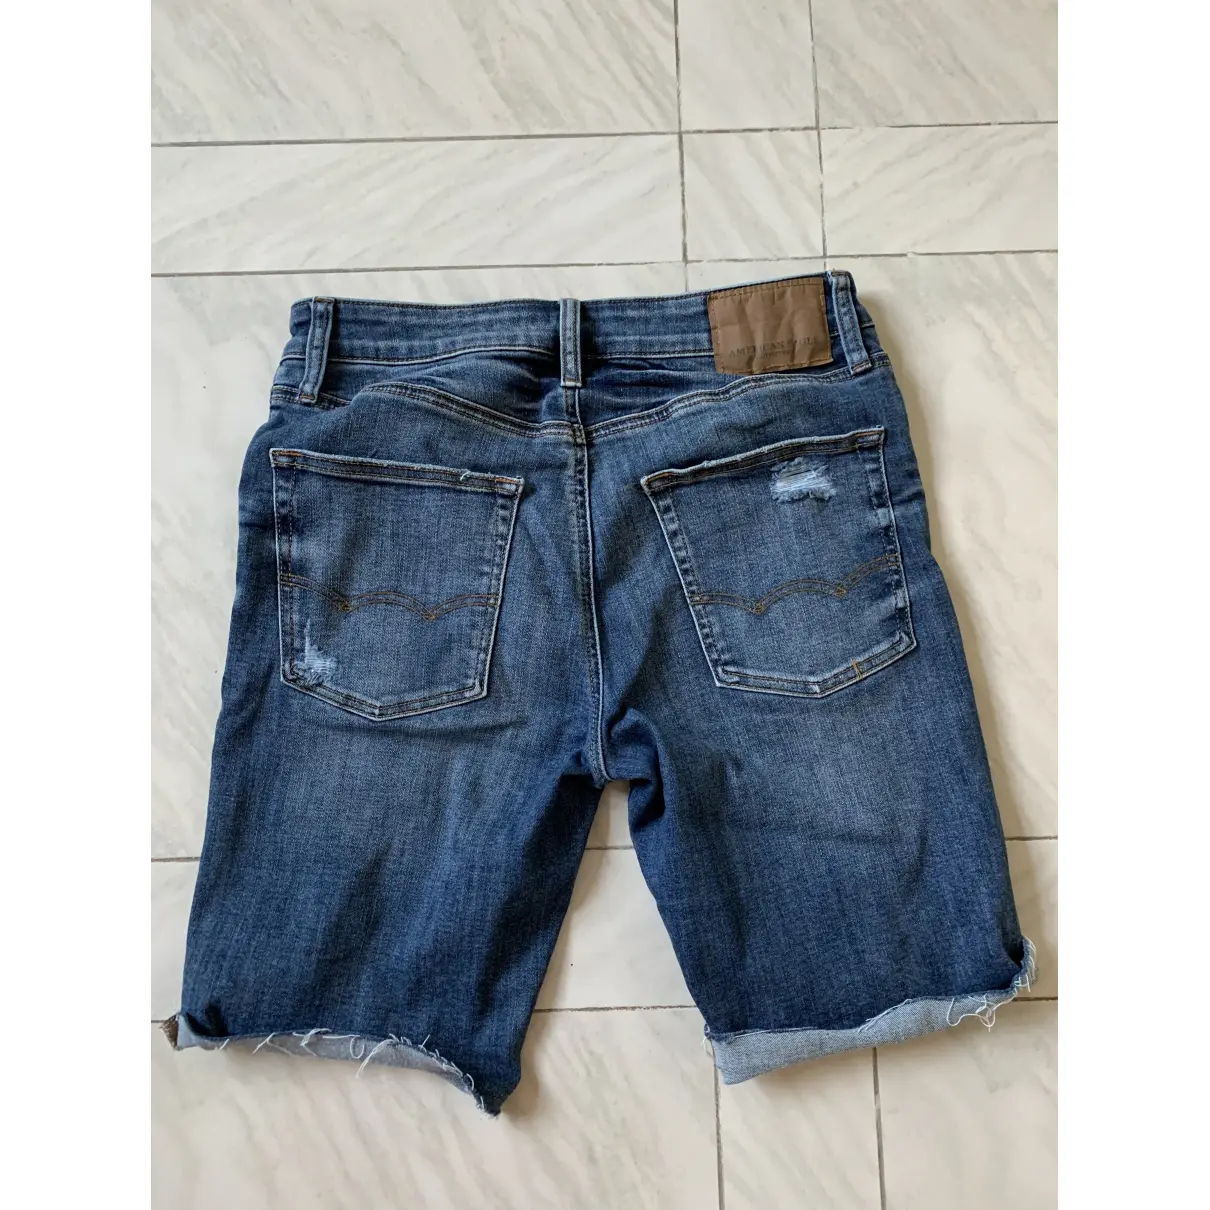 Buy American Outfitters Blue Denim - Jeans Shorts online